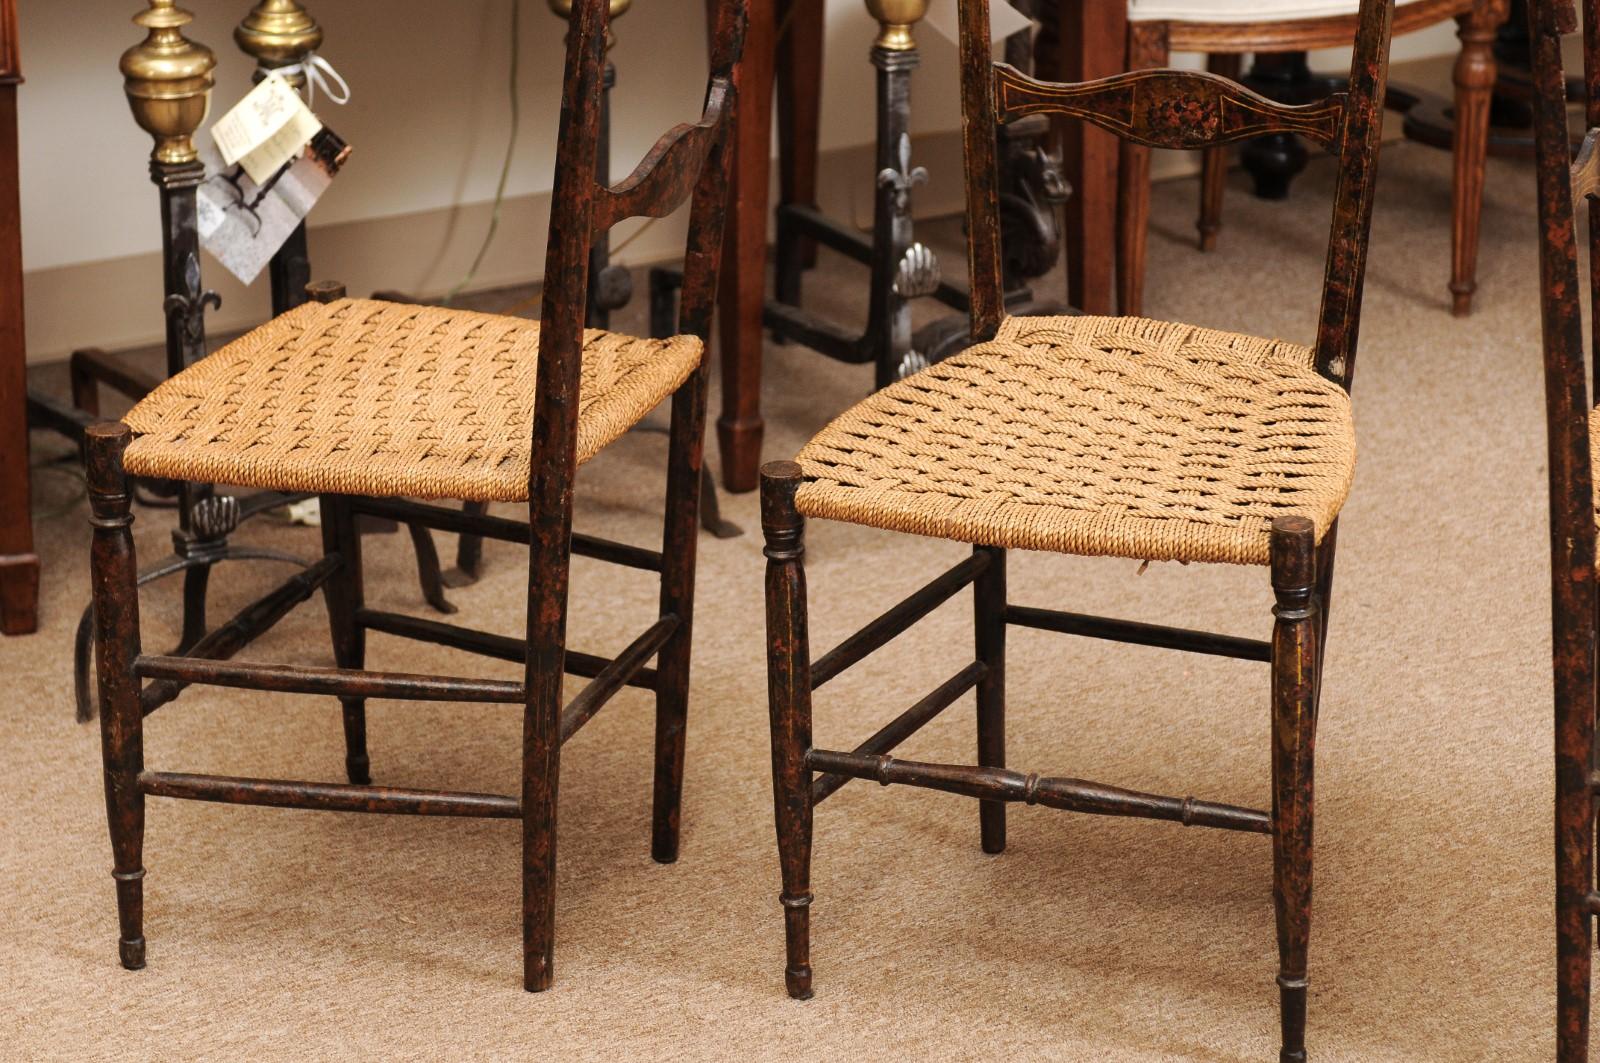 Pair of Neoclassical Black Painted Side Chairs with Woven Seats, Italy ca. 1790 For Sale 10